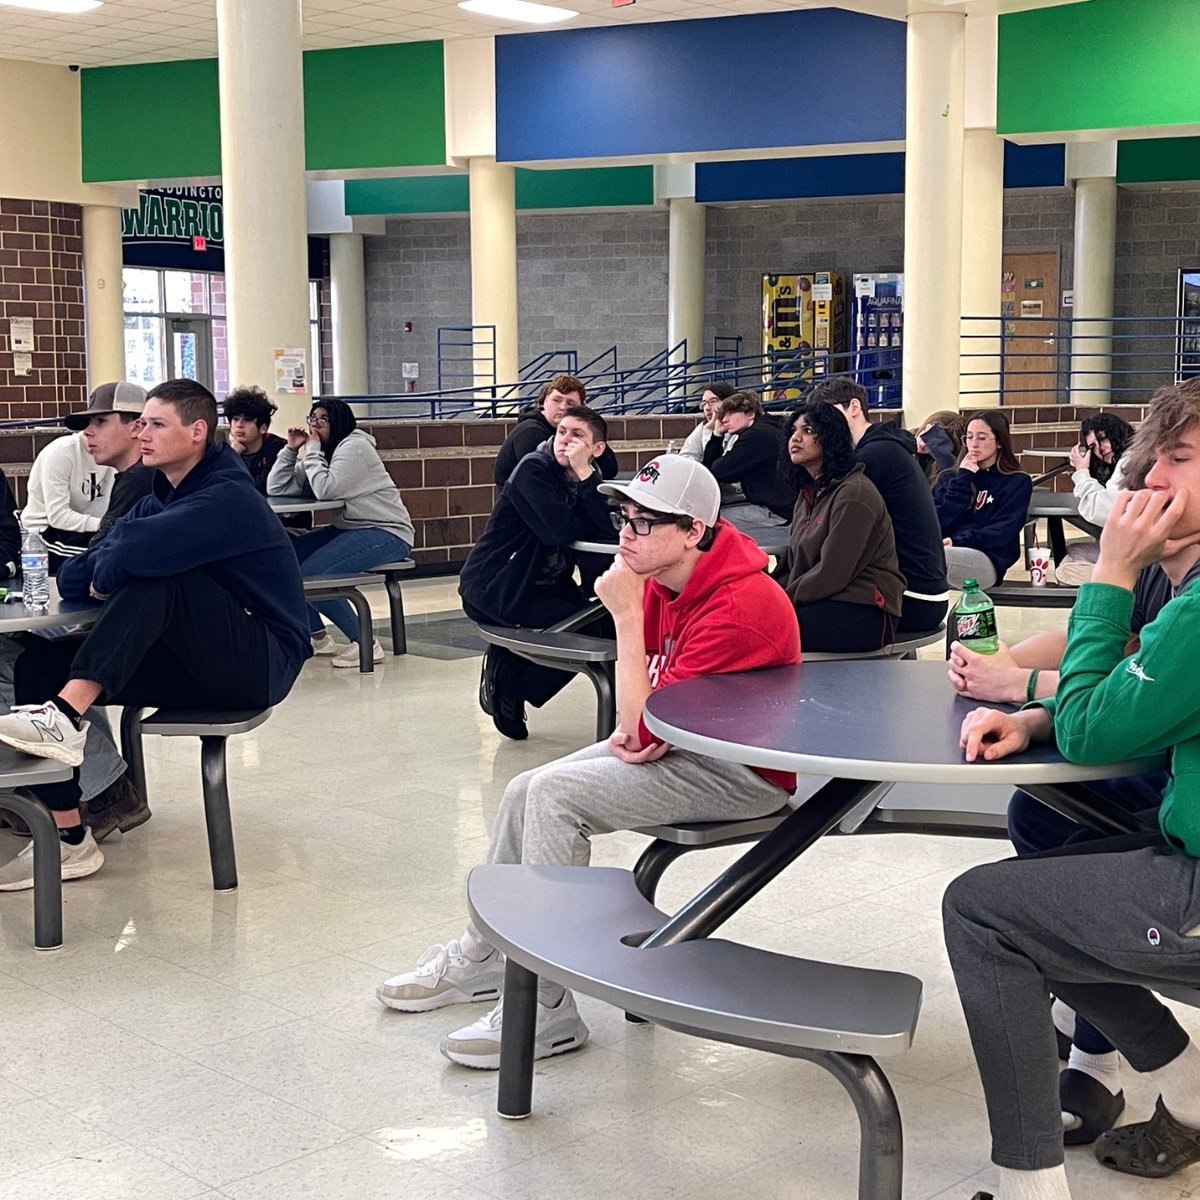 Mr. Adam Philemon shared his career path from oil changer to Certified Master Technician. Students enjoyed learning about his high skill level and expertise, turning a hobby and passion into a lucrative and thriving career that he loves!  #portraitofagraduate @UCPSNC  @AGHoulihan